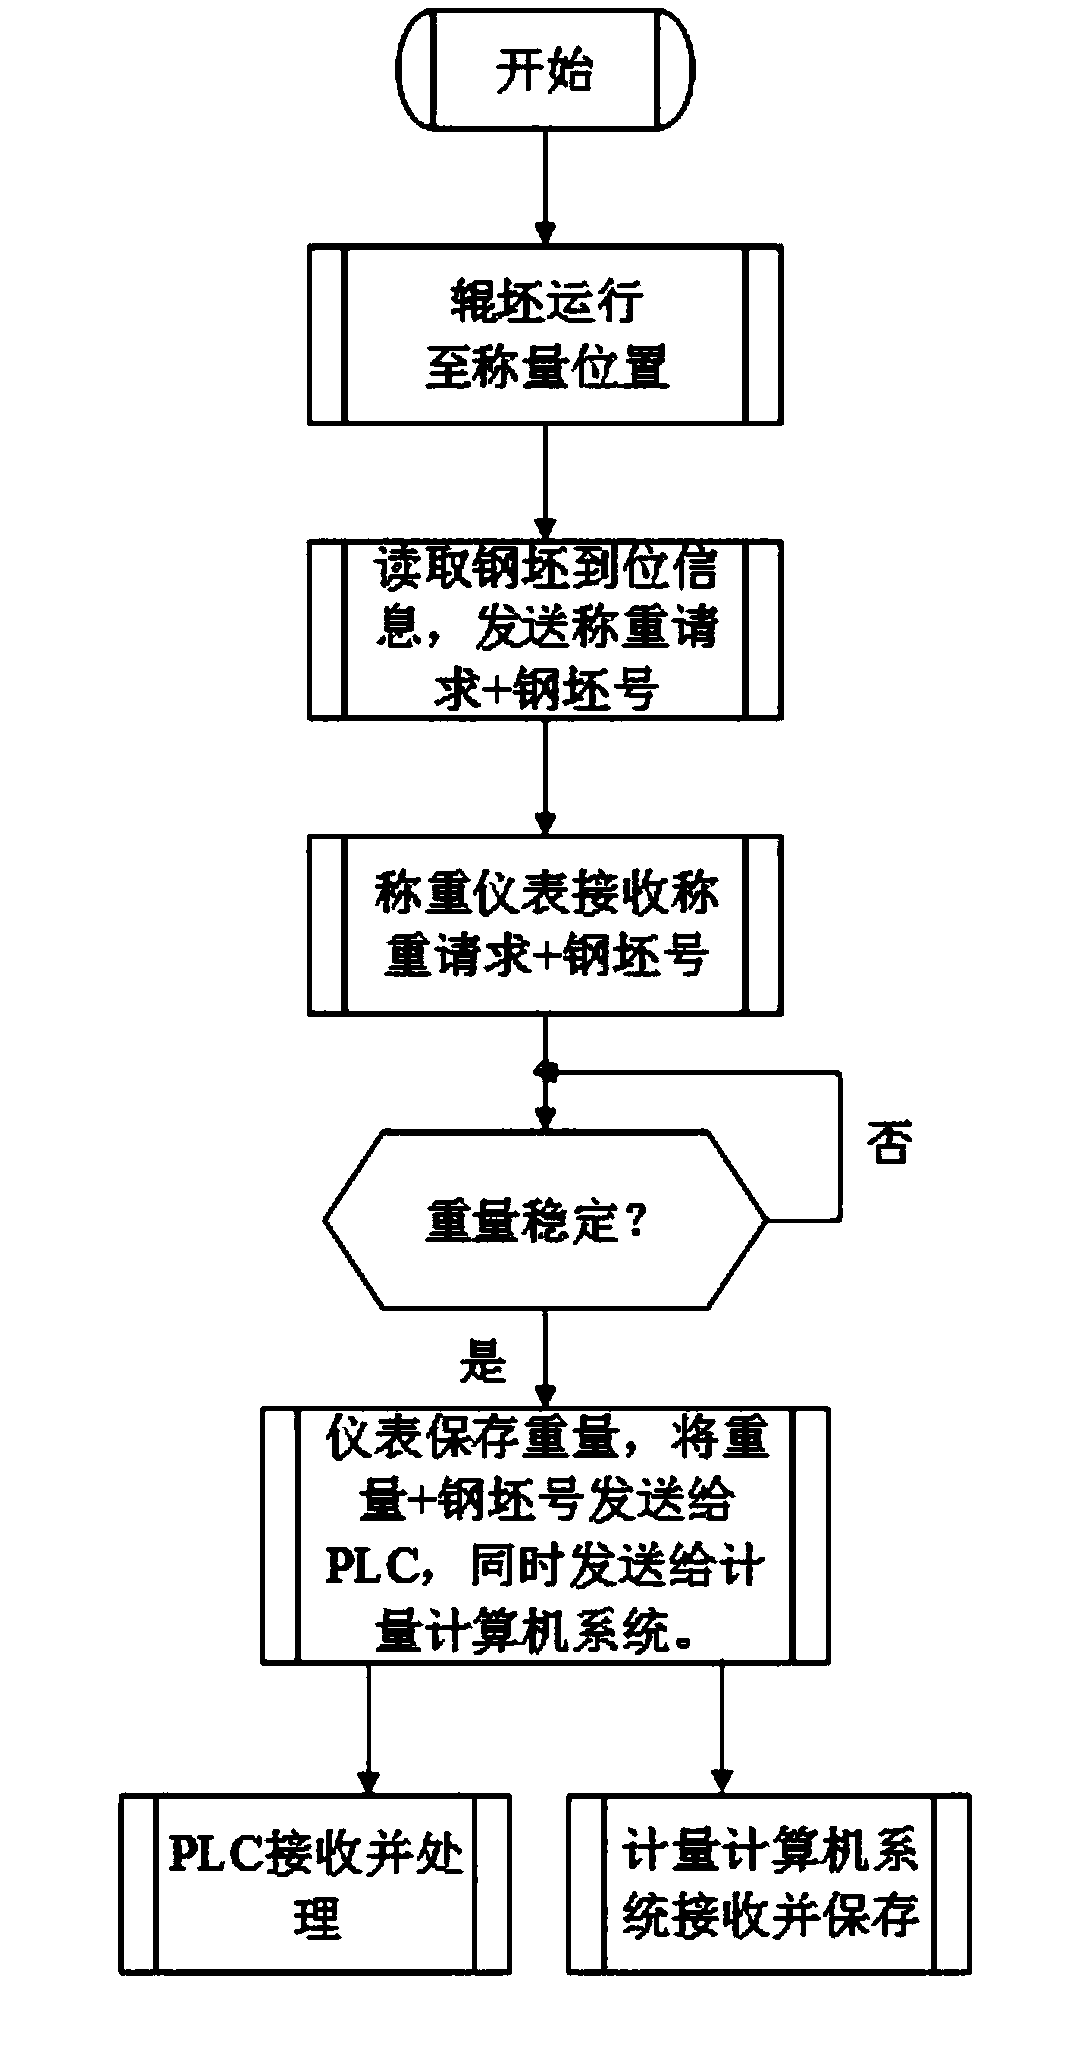 Automatic metering system of roller scale based on weighing controller and method thereof